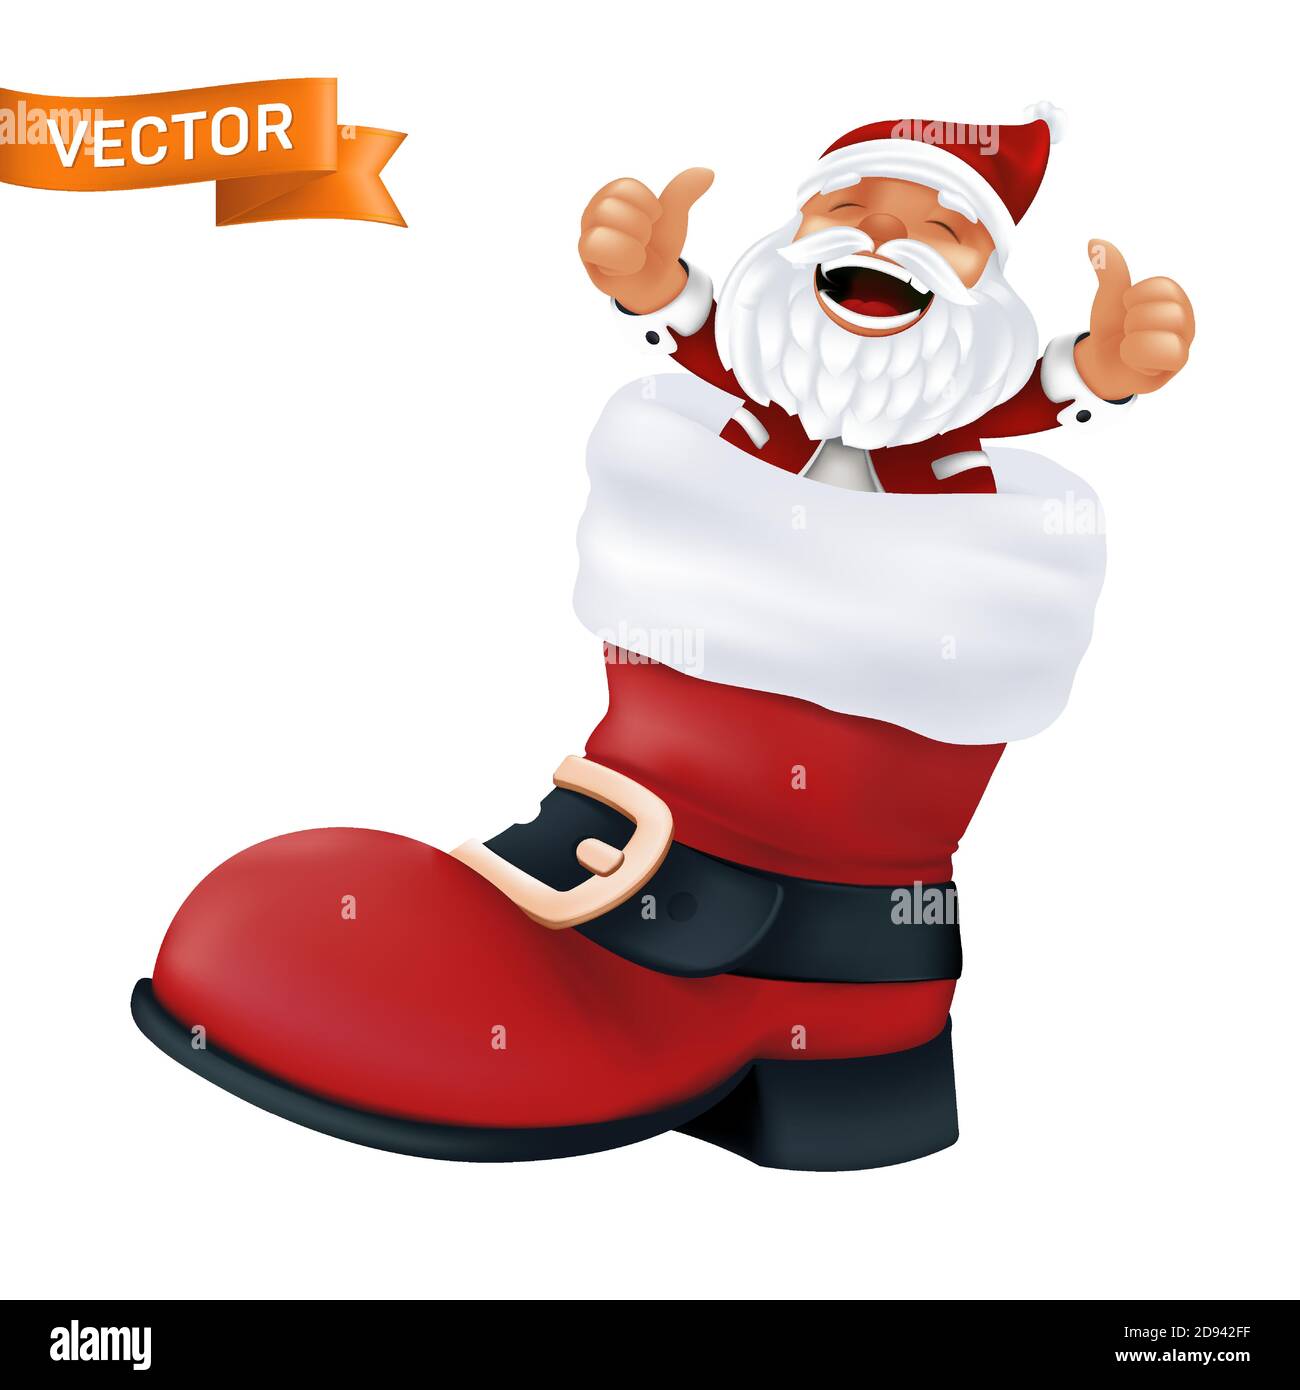 Red boot of Santa Claus with a white fur and a black belt with a golden buckle. Realistic vector illustration of a funny character and a Christmas foo Stock Vector